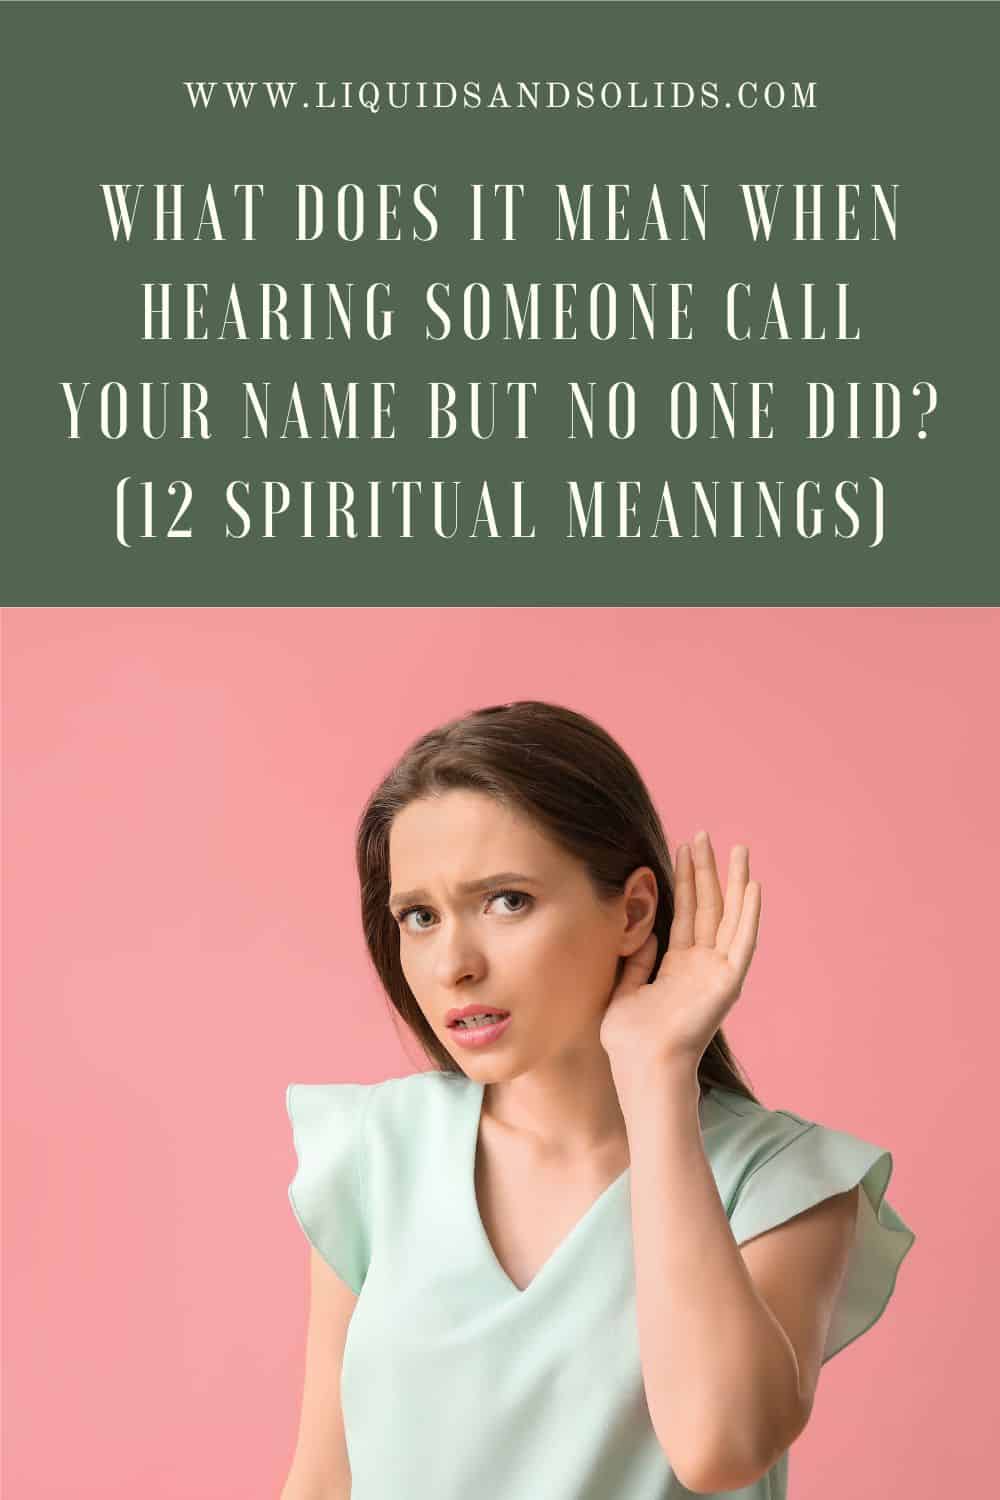 What Does It Mean When Hearing Someone Call Your Name But No One Did? (12 Spiritual Meanings)